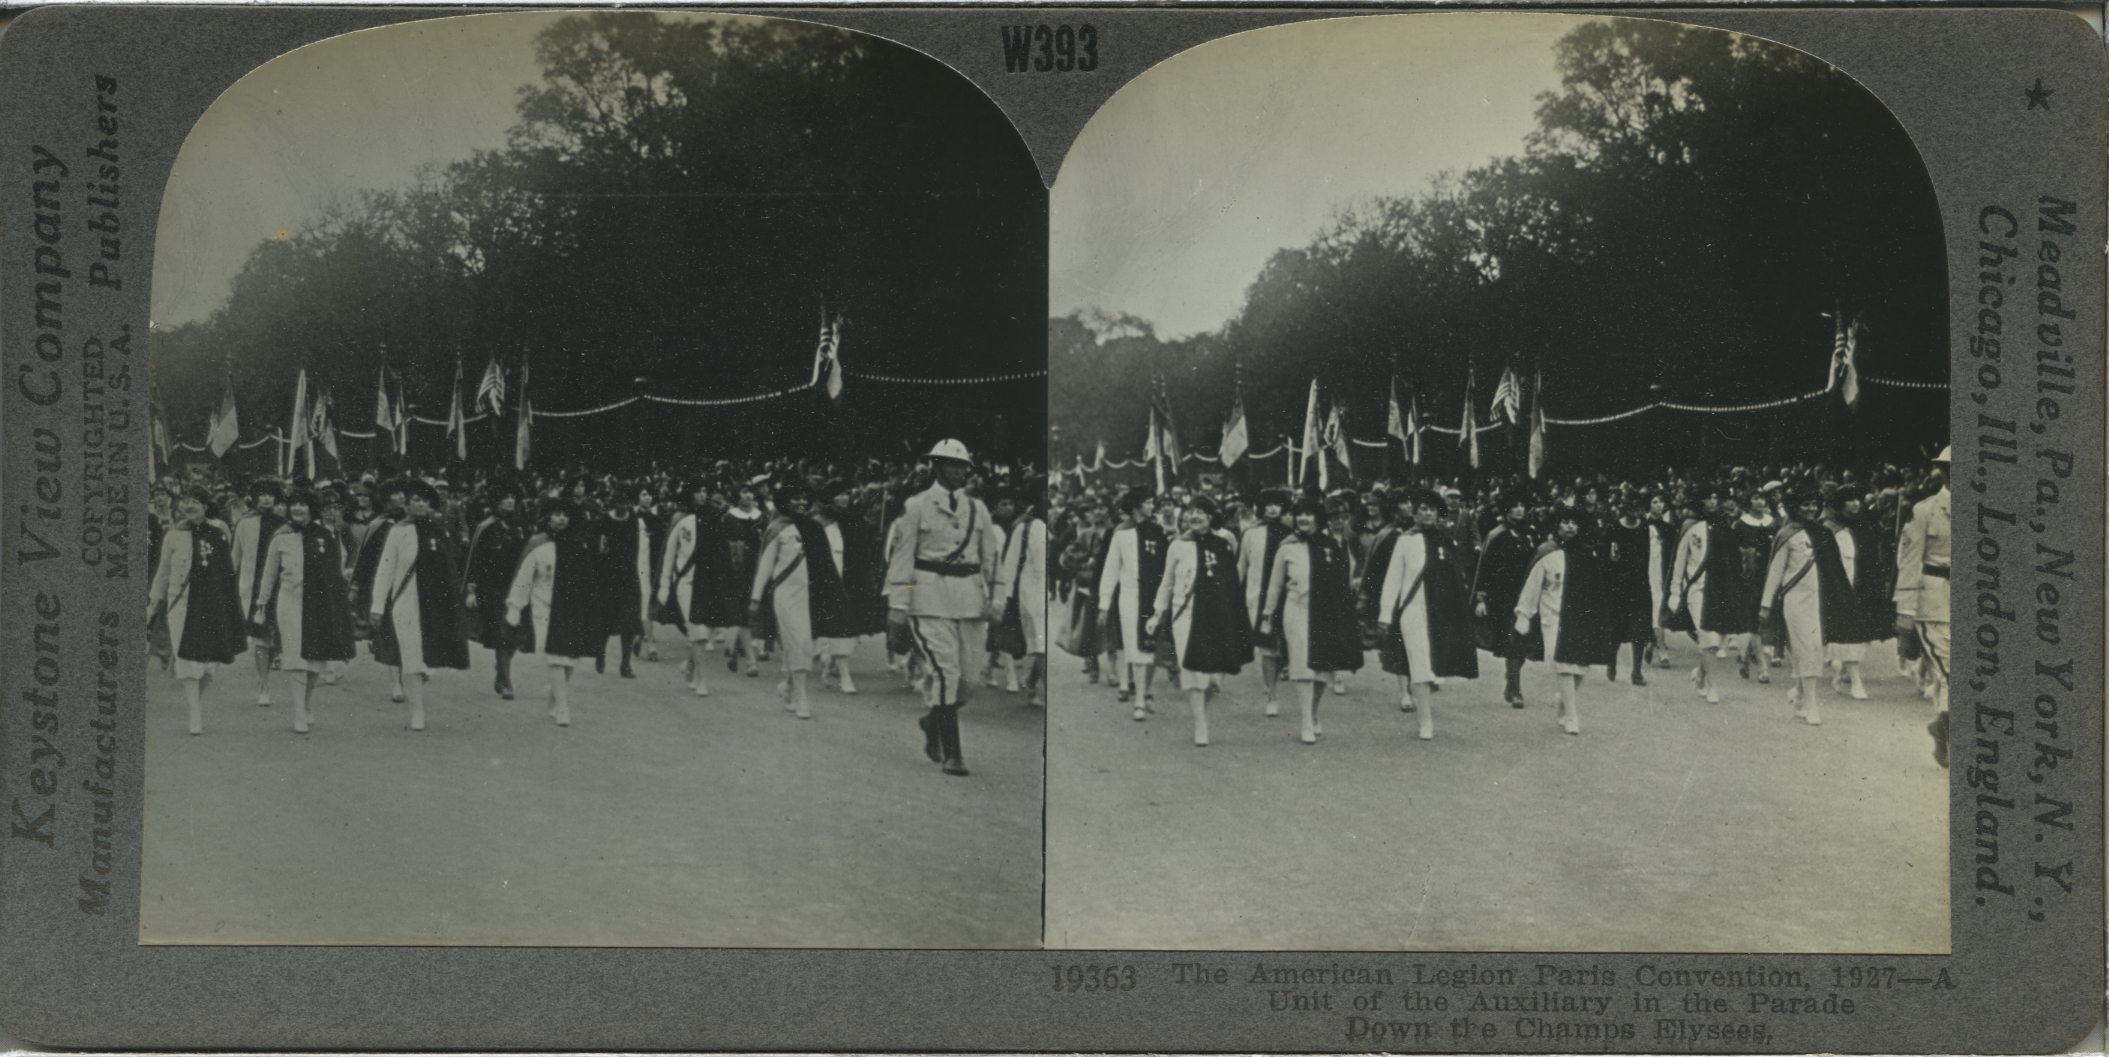 The American Legion Paris Convention, 1927--A Unit of the Auxiliary in the Parade Down the Champs Elysees